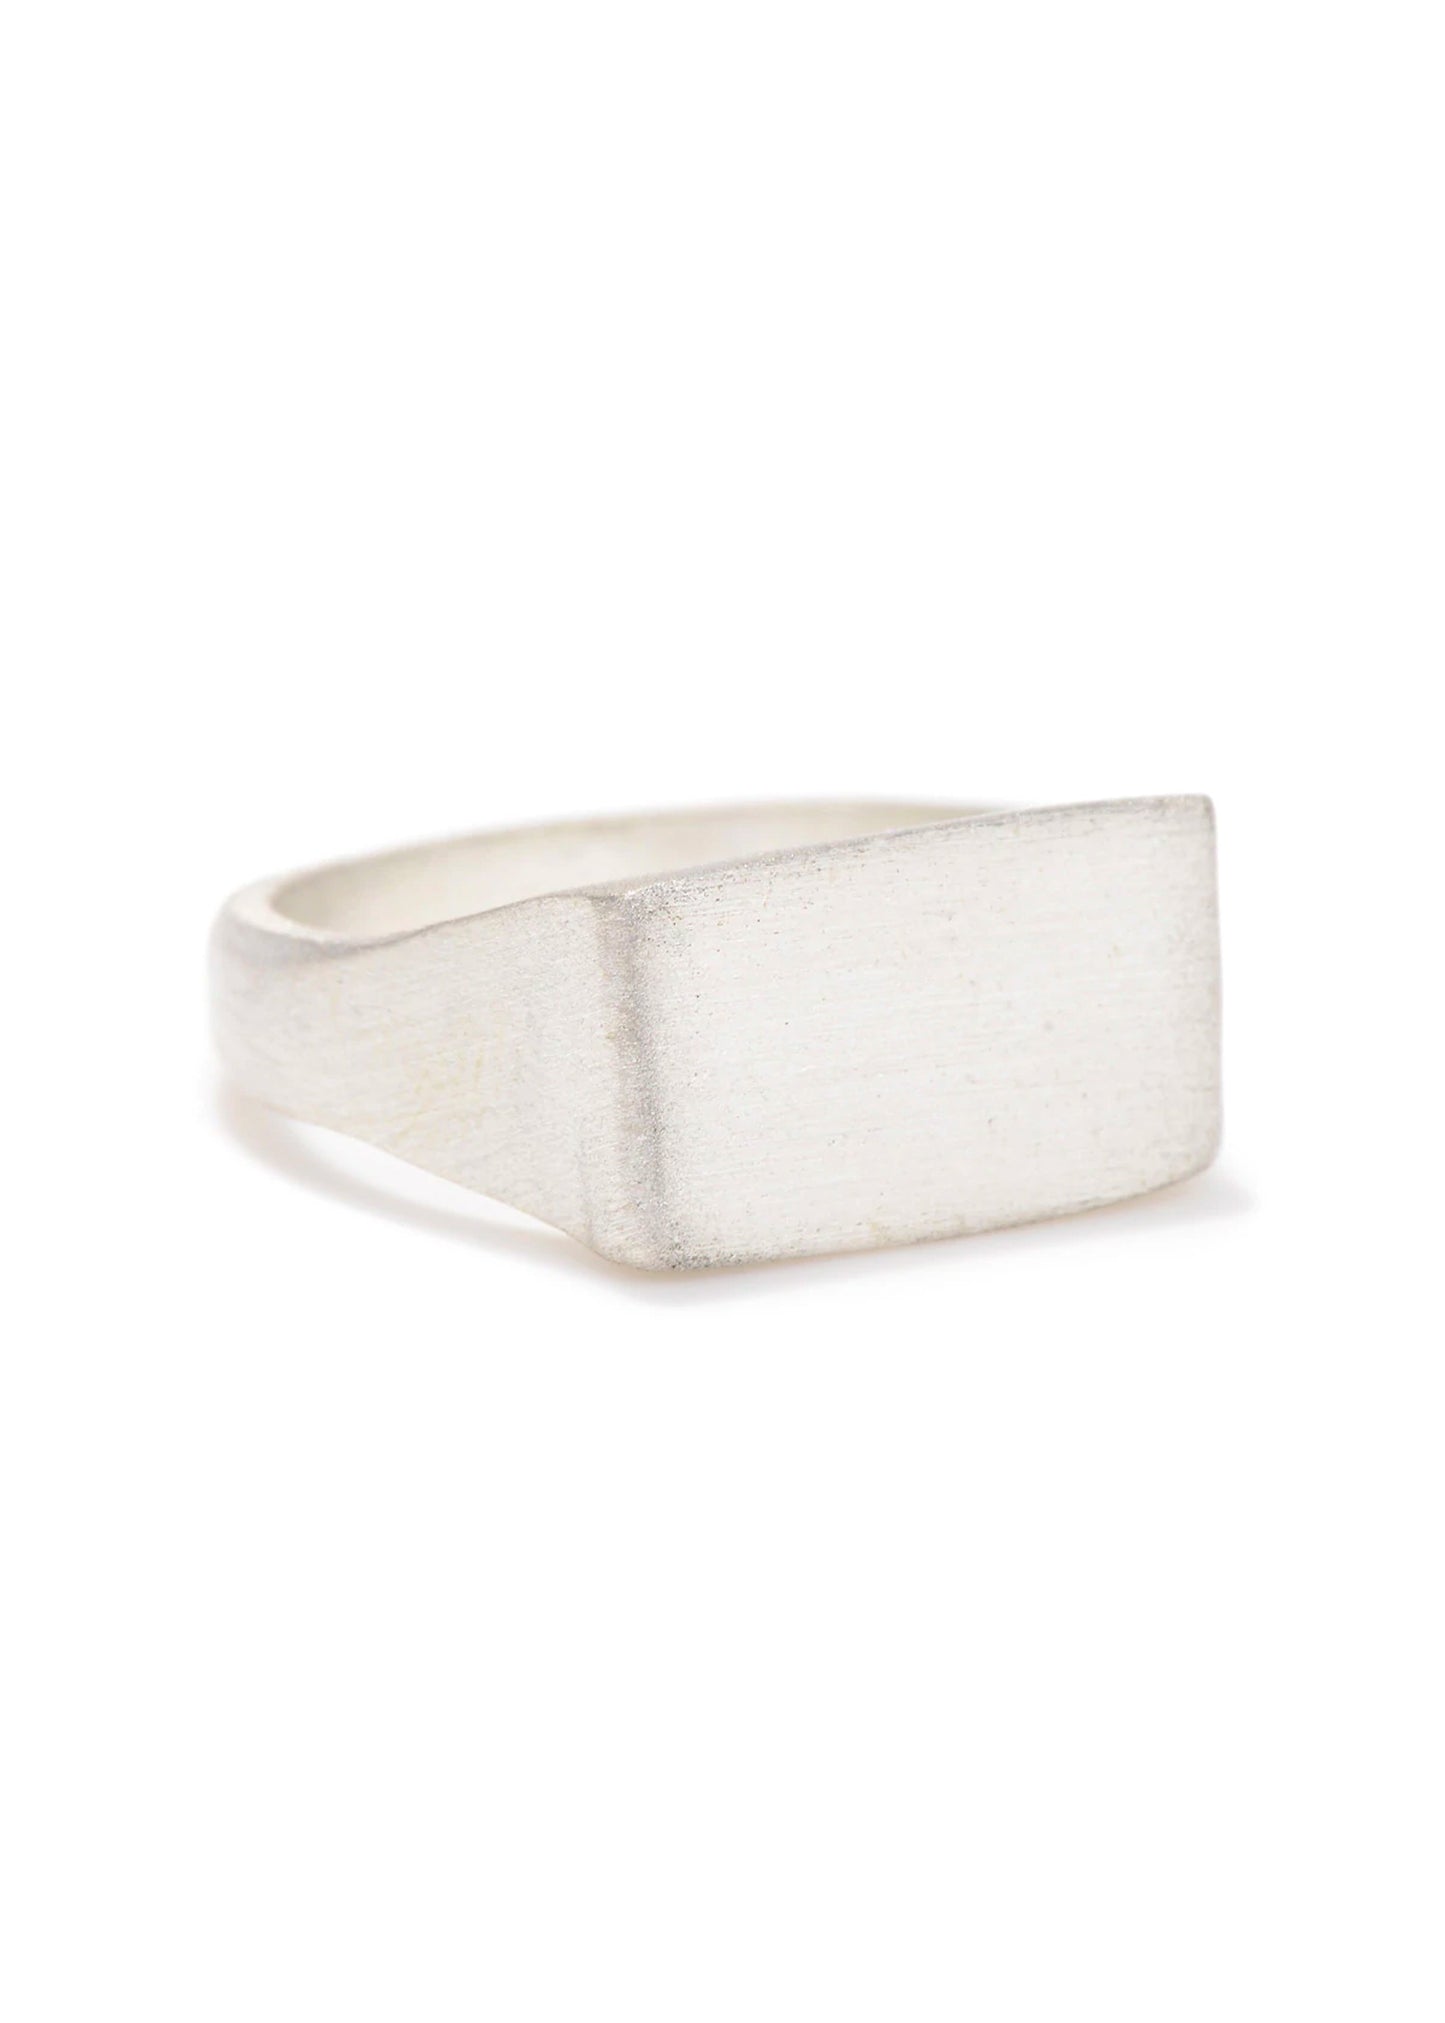 Lawrence Ring Jewelry Tarin Thomas Sterling Silver/Satin 9 